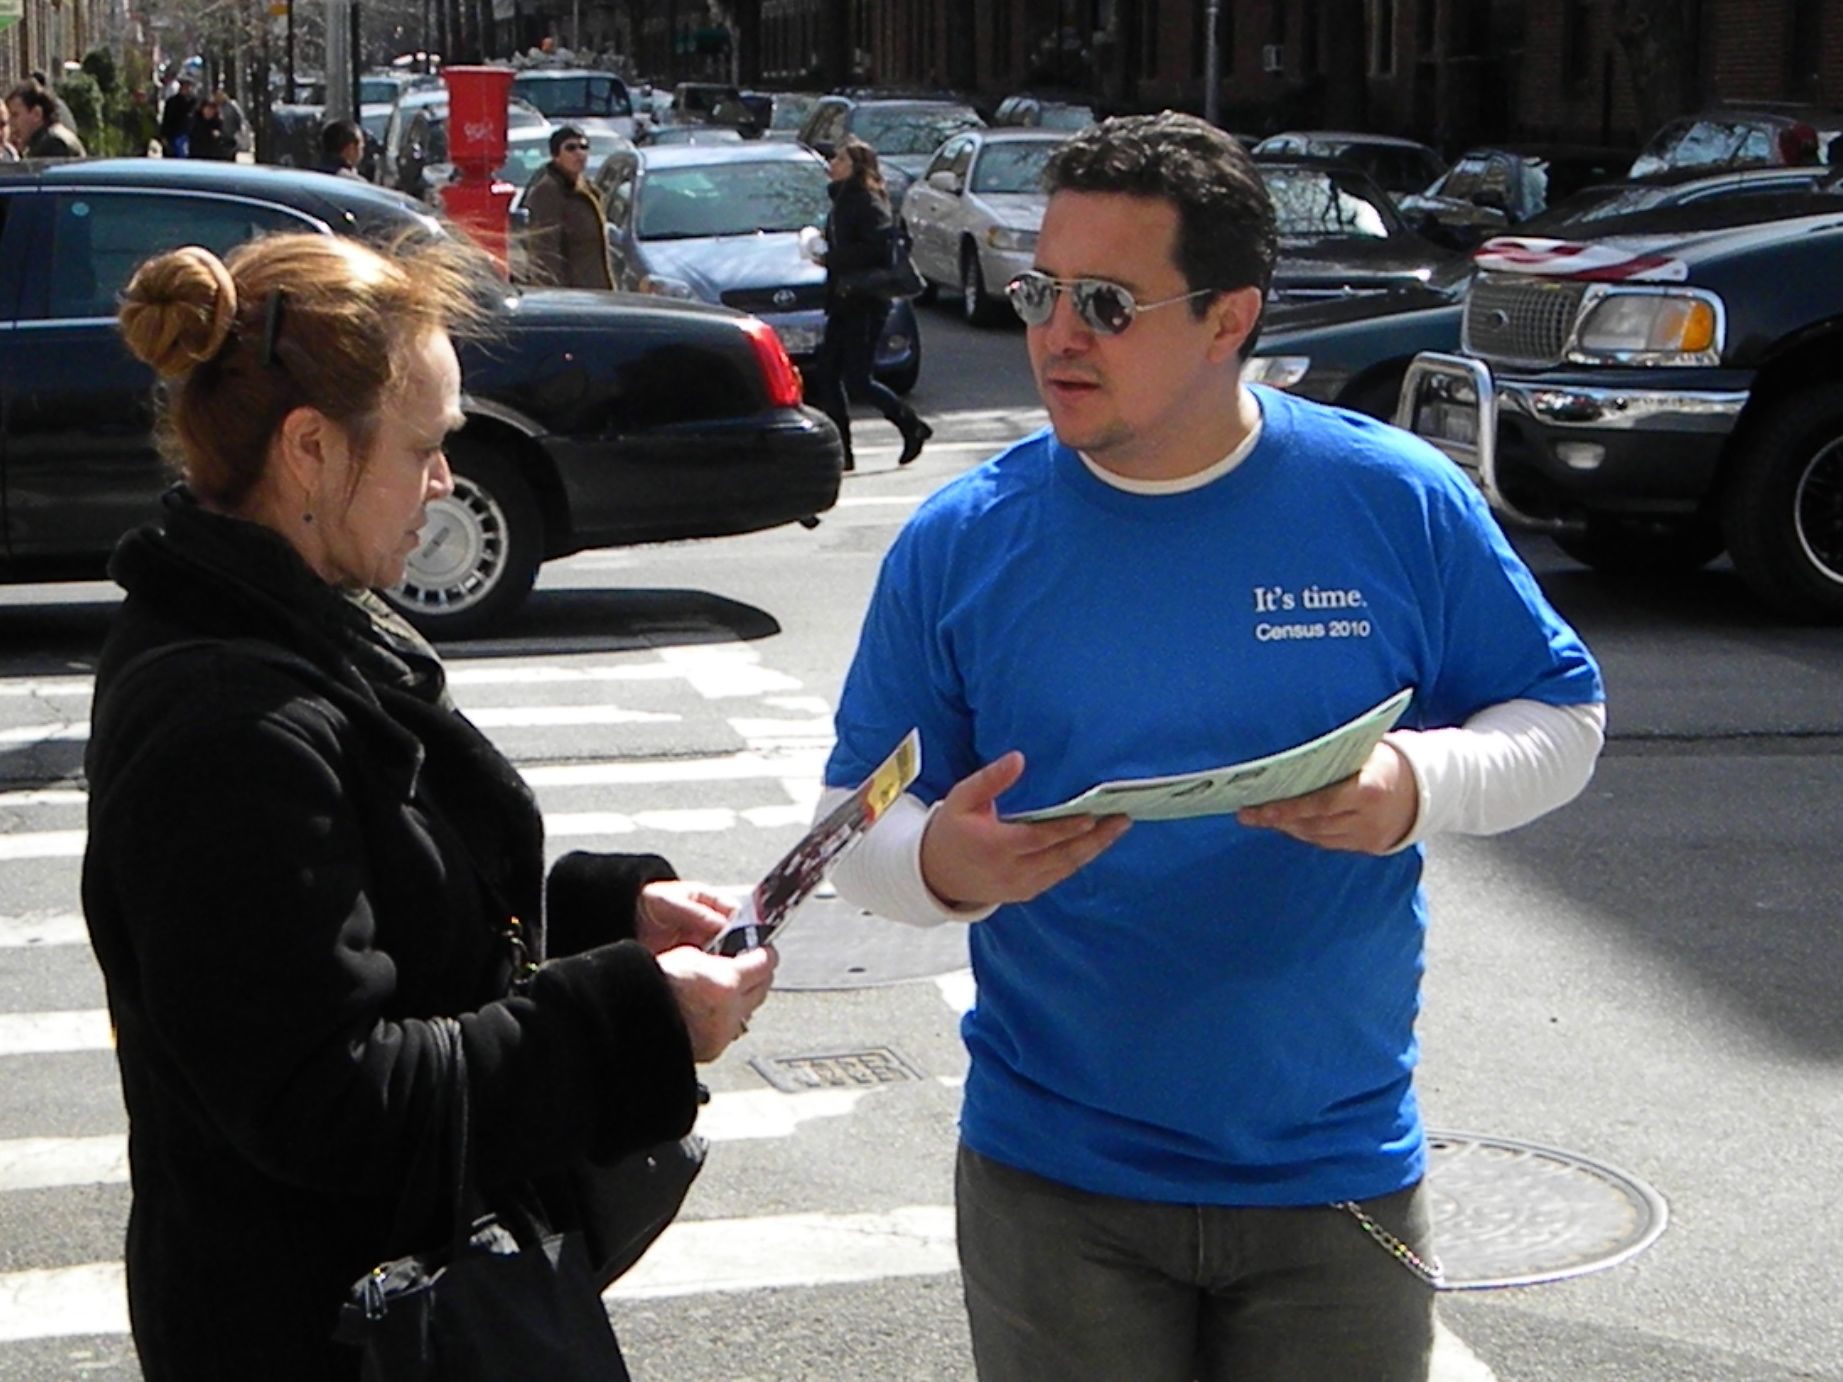 Spreading the word about the census in Jackson Heights, Queens.